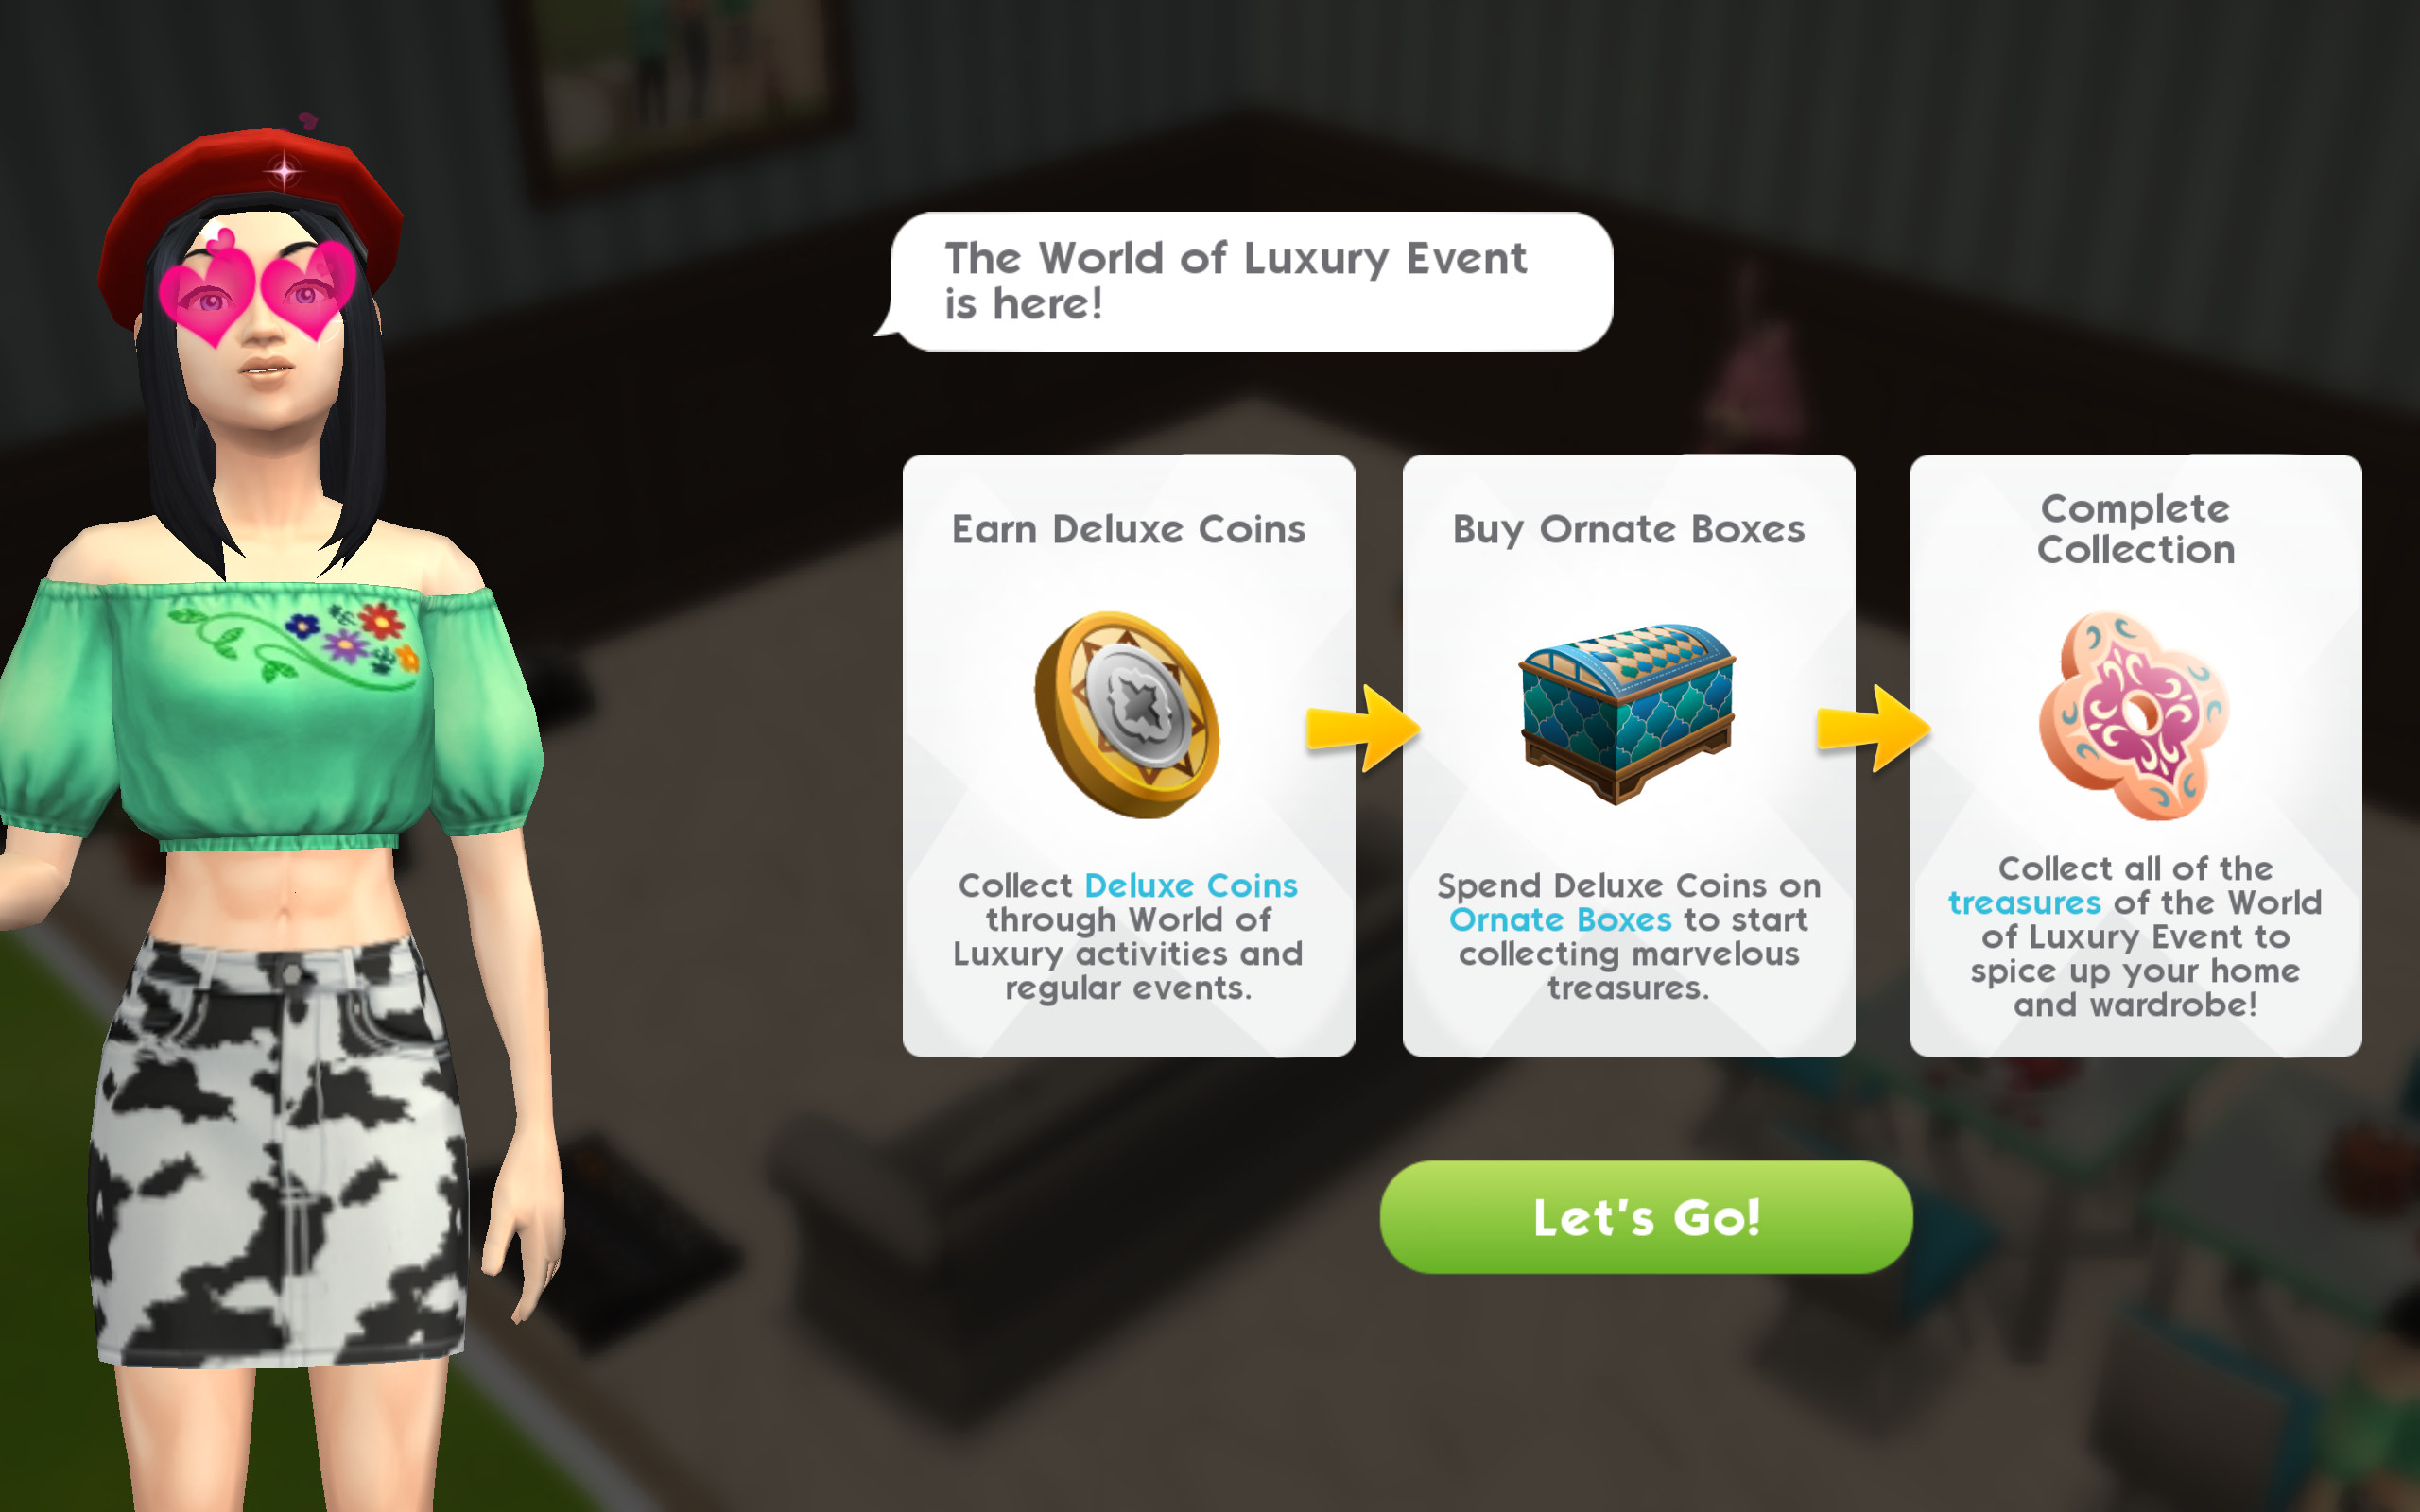 How To Complete the World of Luxury Event (Bubble Blower) in The